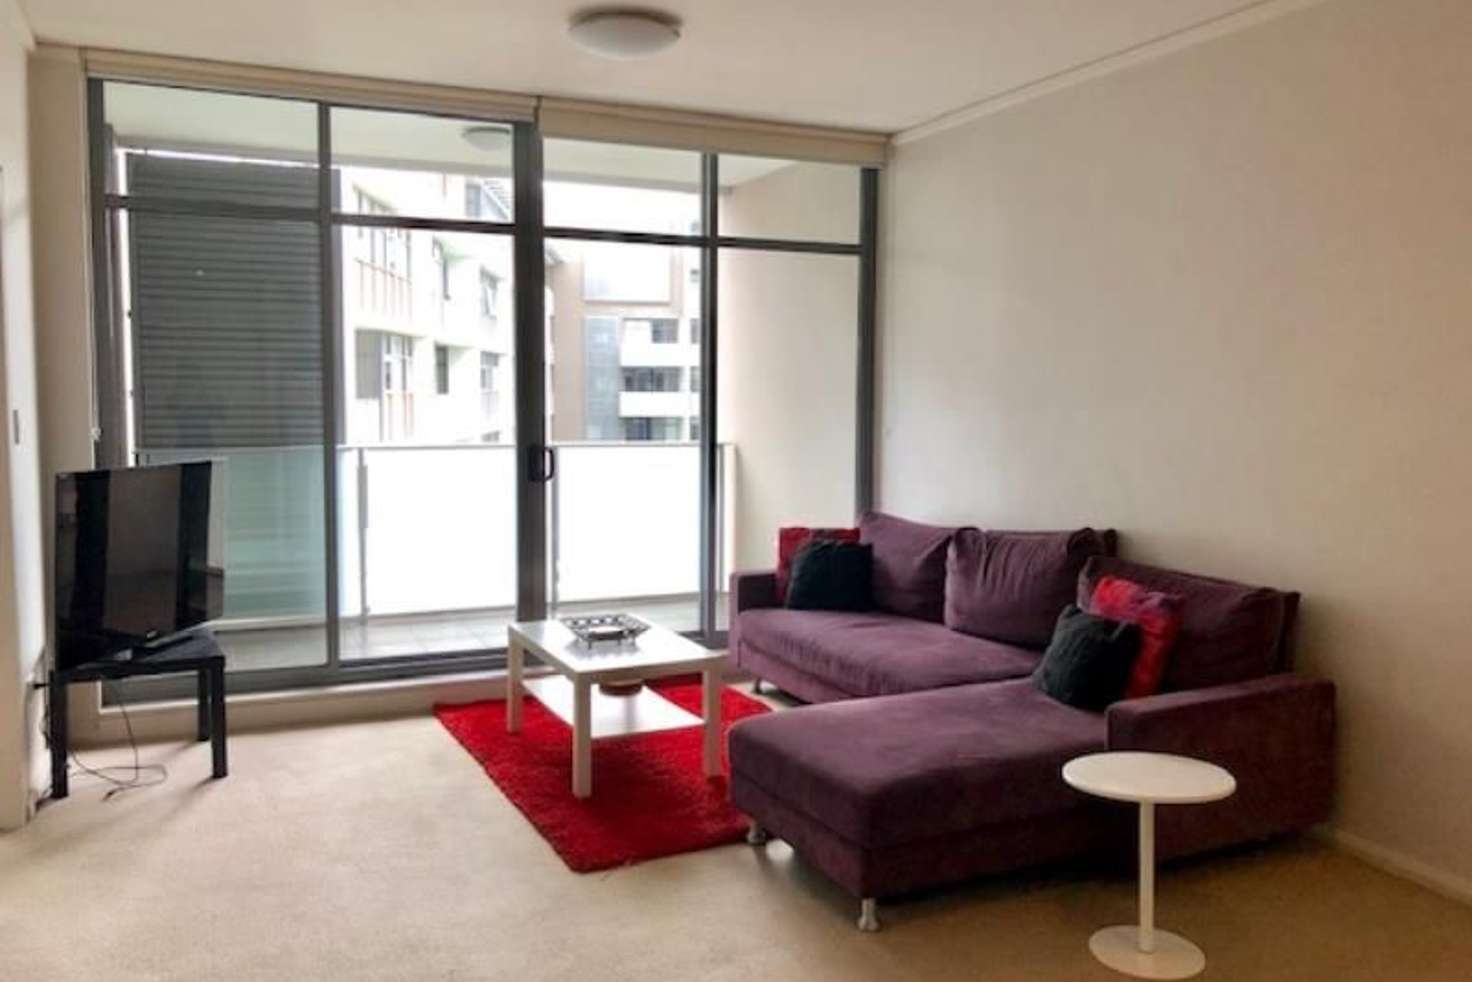 Main view of Homely apartment listing, 512/747 Anzac Parade, Maroubra NSW 2035